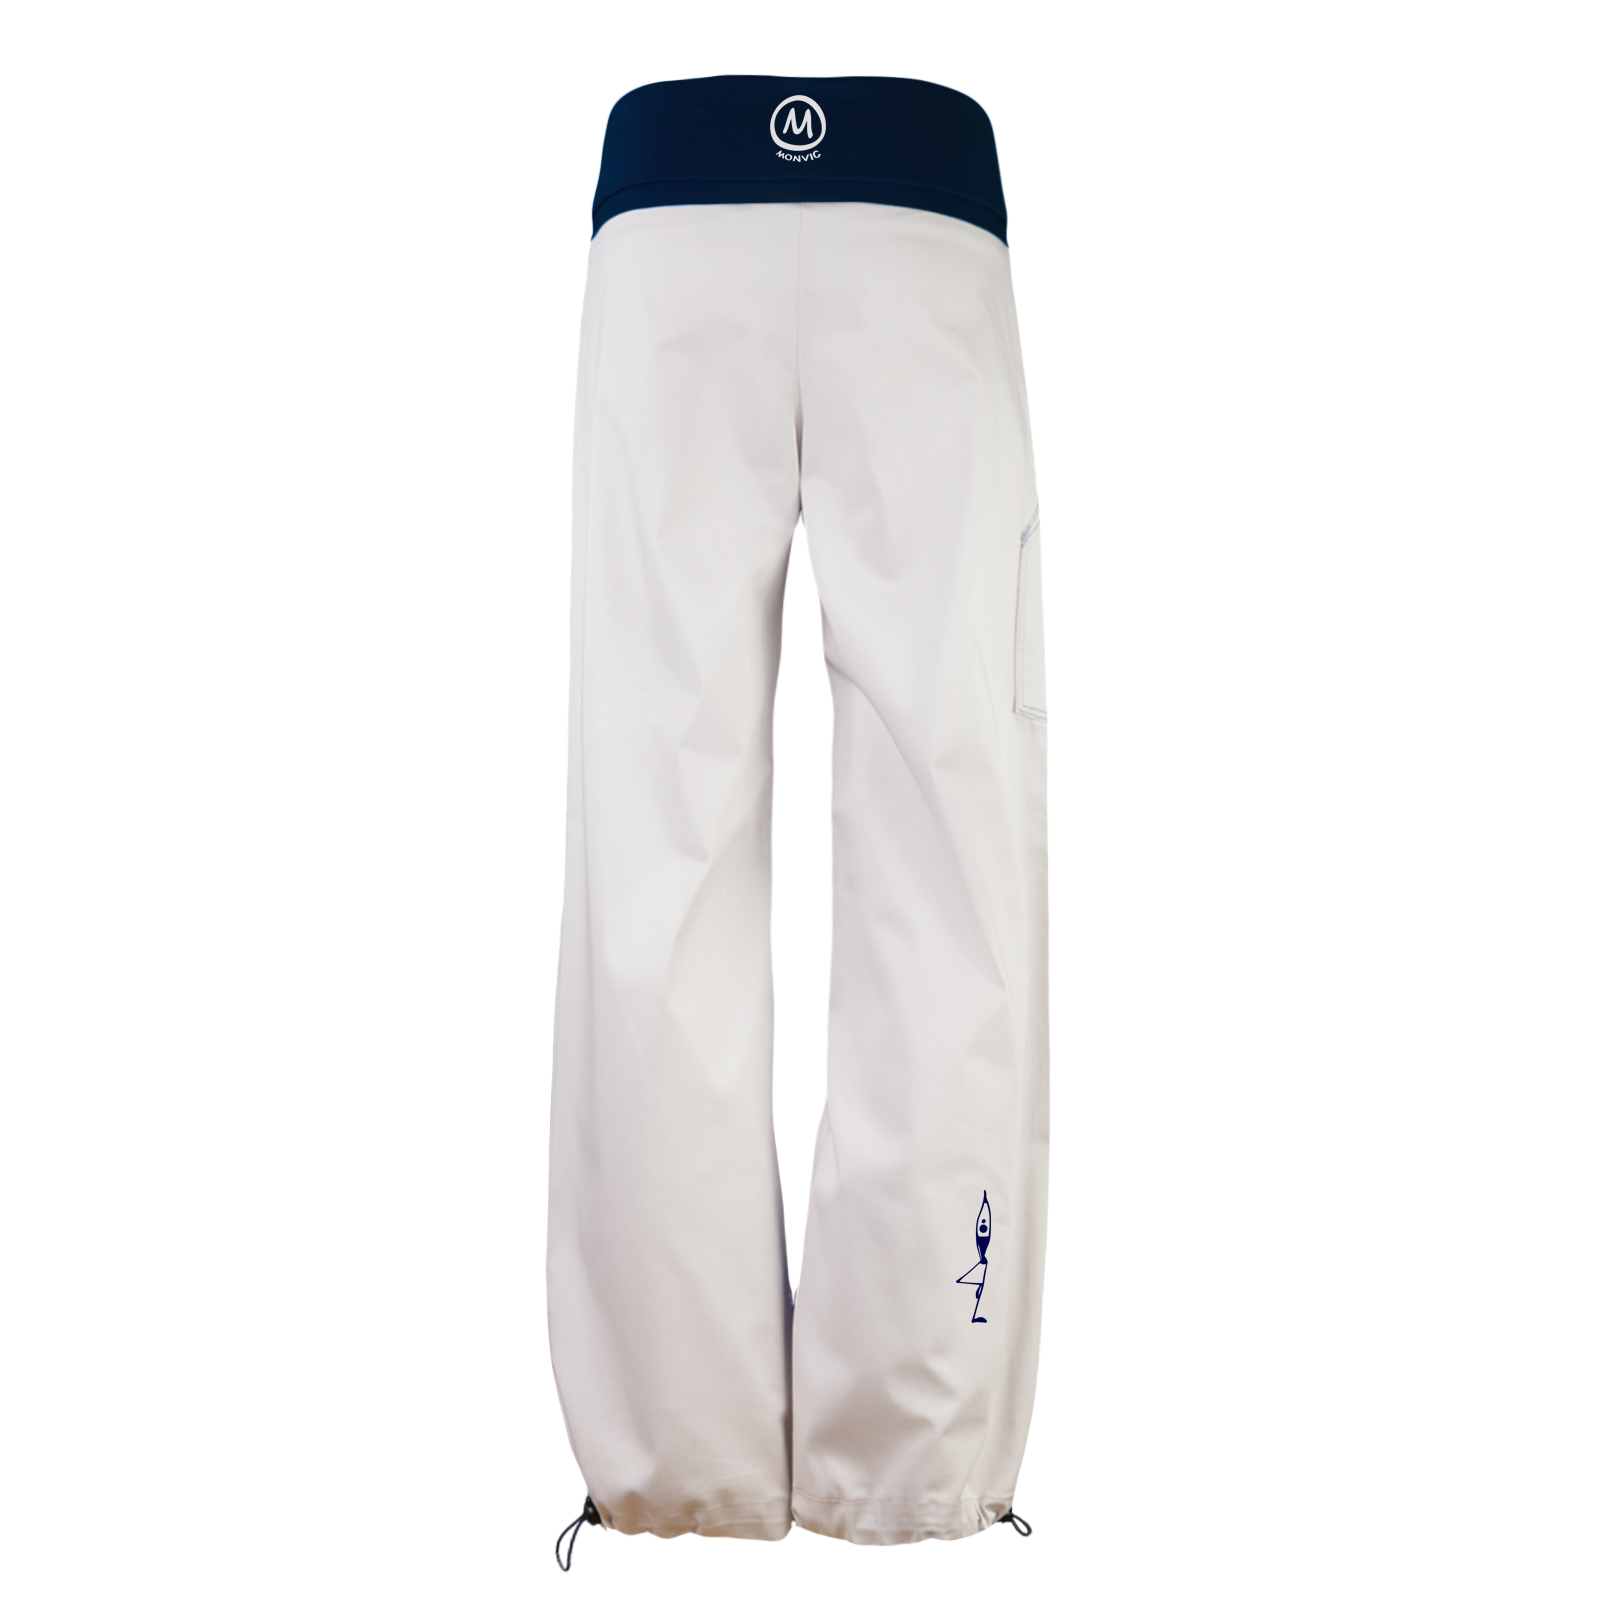 trousers women with waist band white and blue BALZEN Monvic